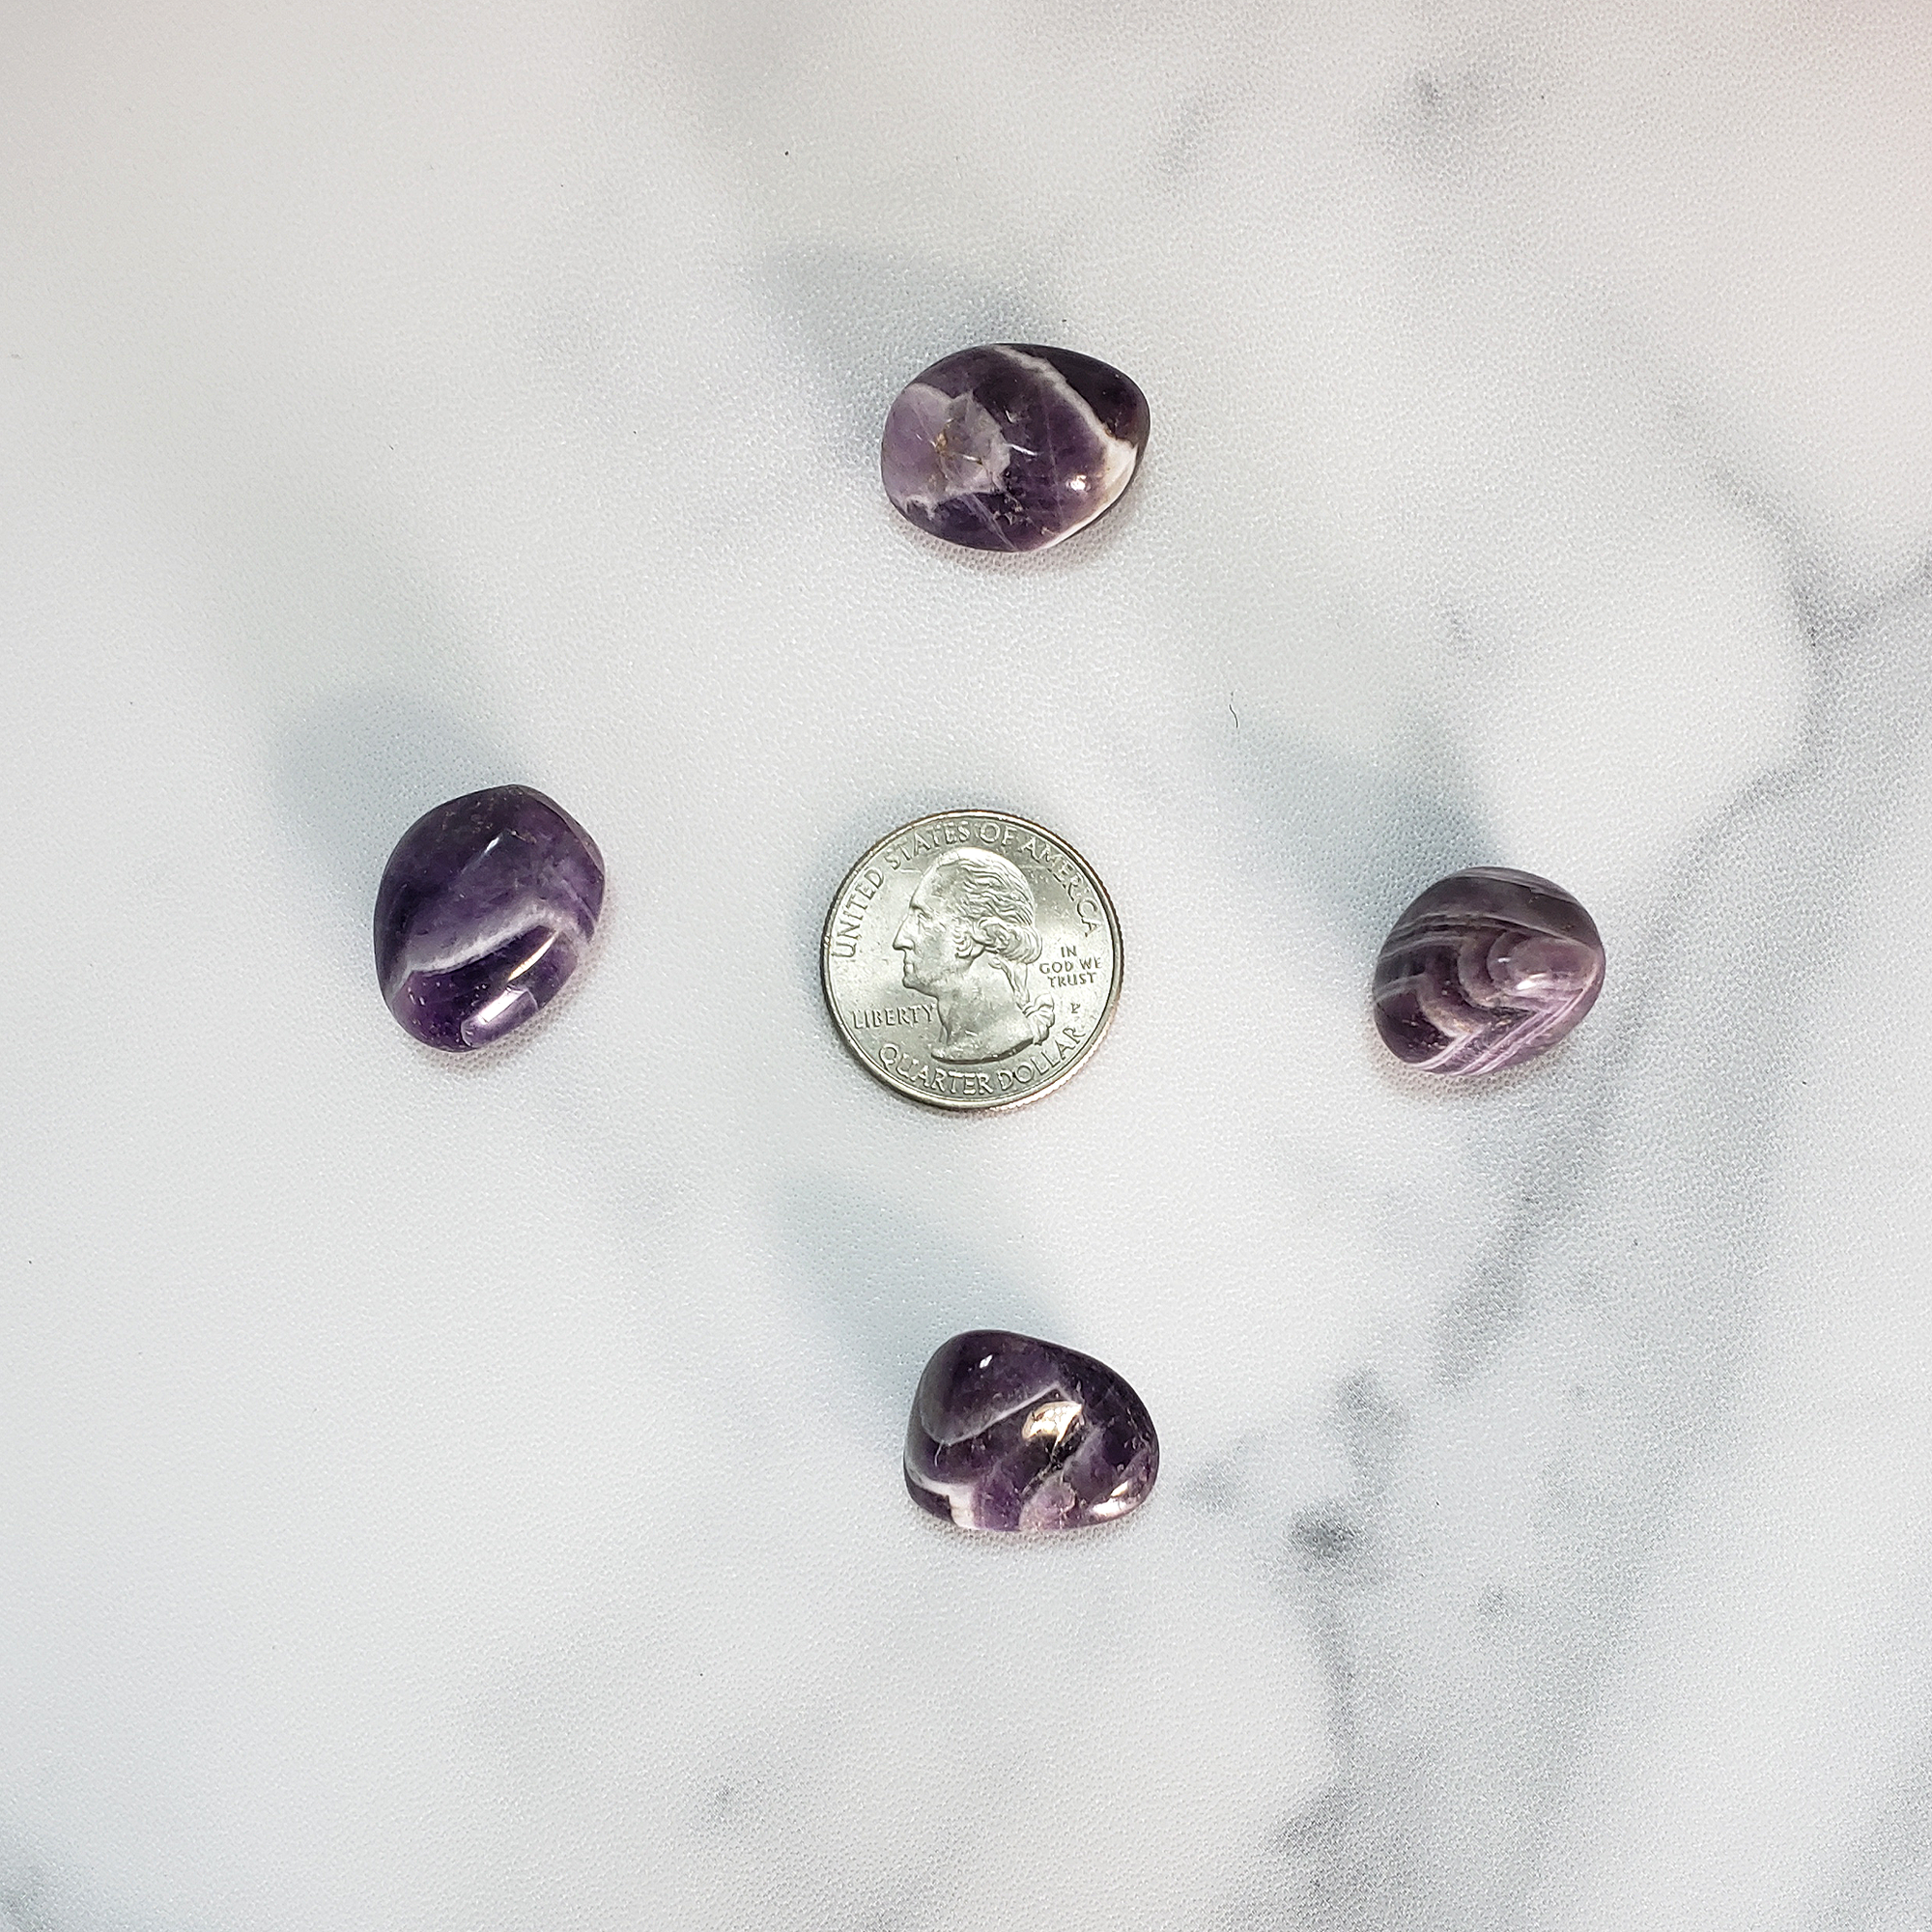 Chevron Amethyst Natural Tumbled Crystal - Small One Stone - Size Comparison